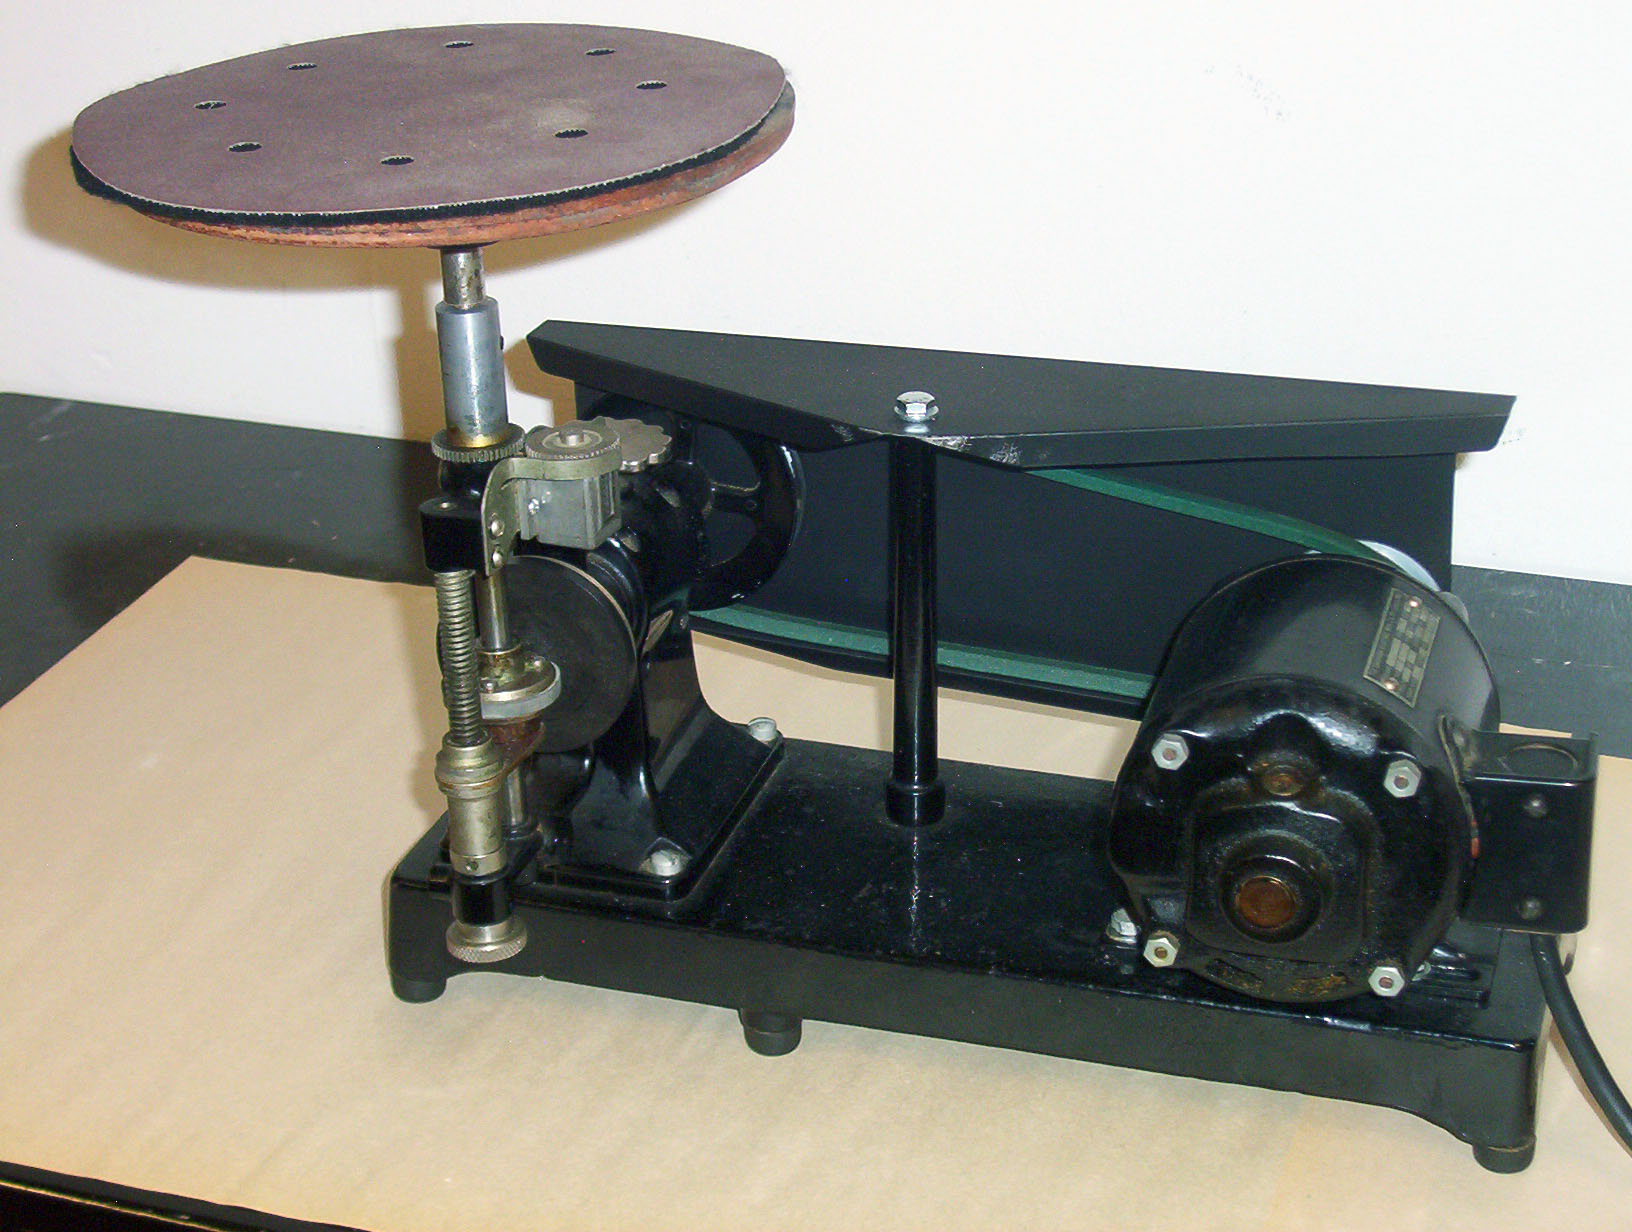 St. Lawrence University: Physics - Lecture/Demos: Motorized Turntable